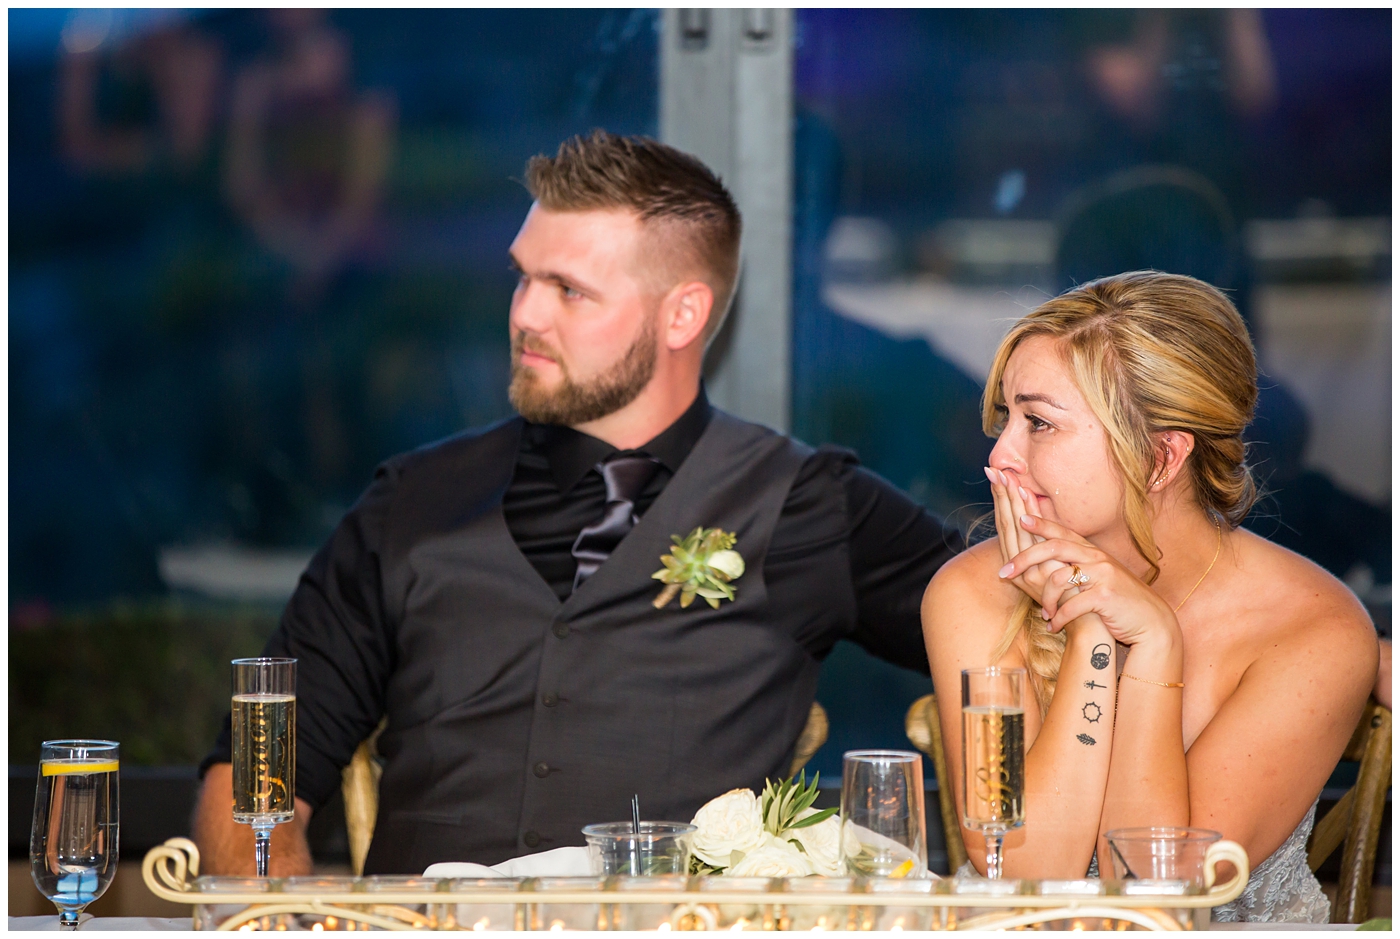 bride with fishtail braid and strapless dress with white rose and greenery bouquet with groom in black pants and vest and tie with rolled up shirt sleeves with succulent boutonniere wedding day portrait at reception during toasts